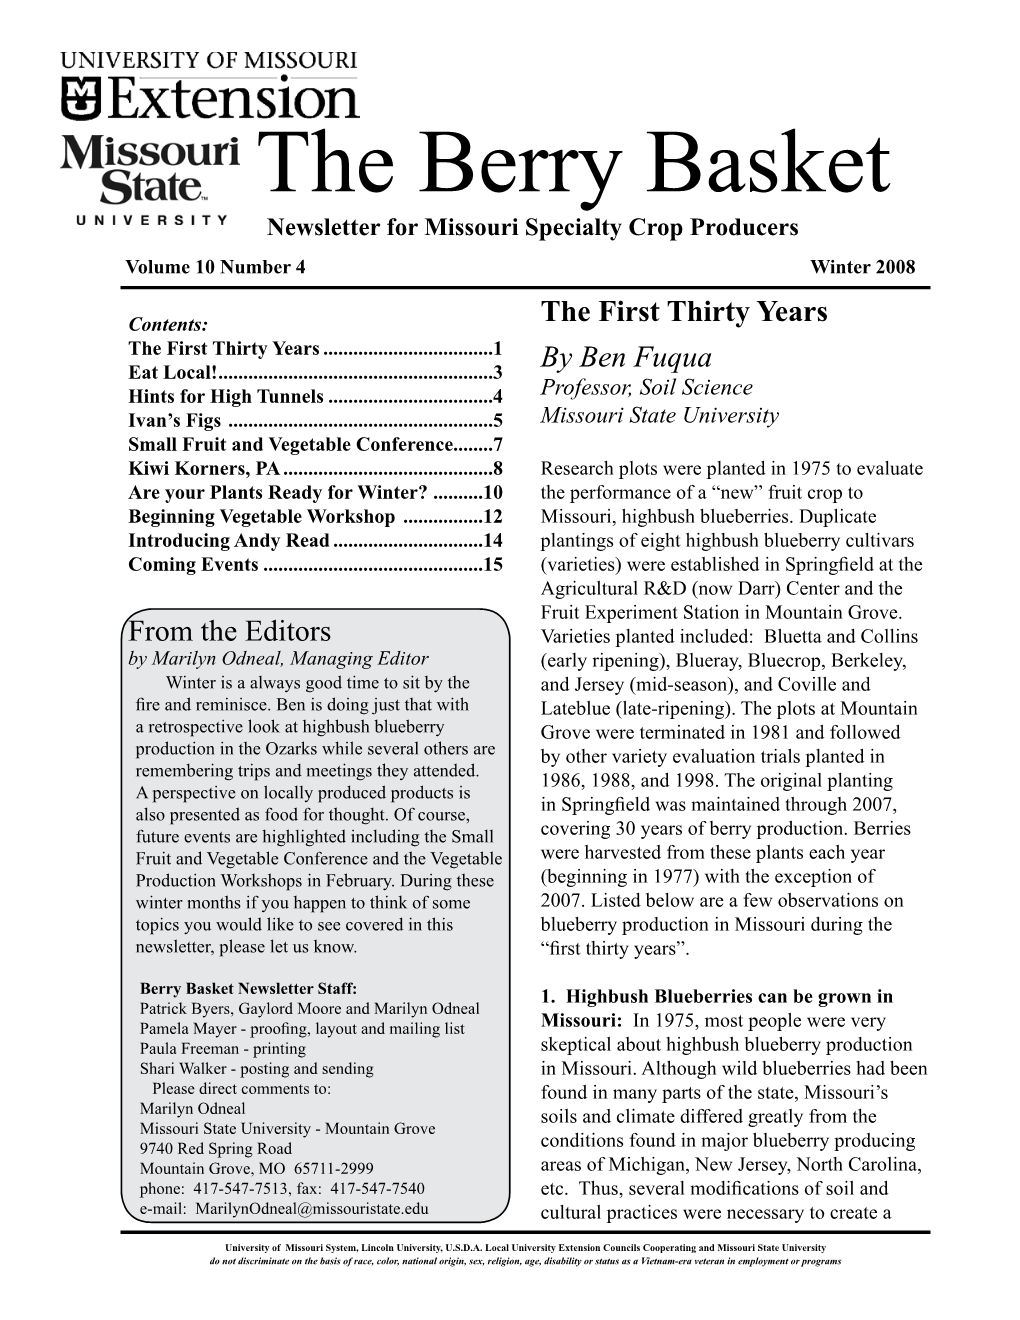 The Berry Basket Newsletter for Missouri Specialty Crop Producers Volume 10 Number 4 Winter 2008